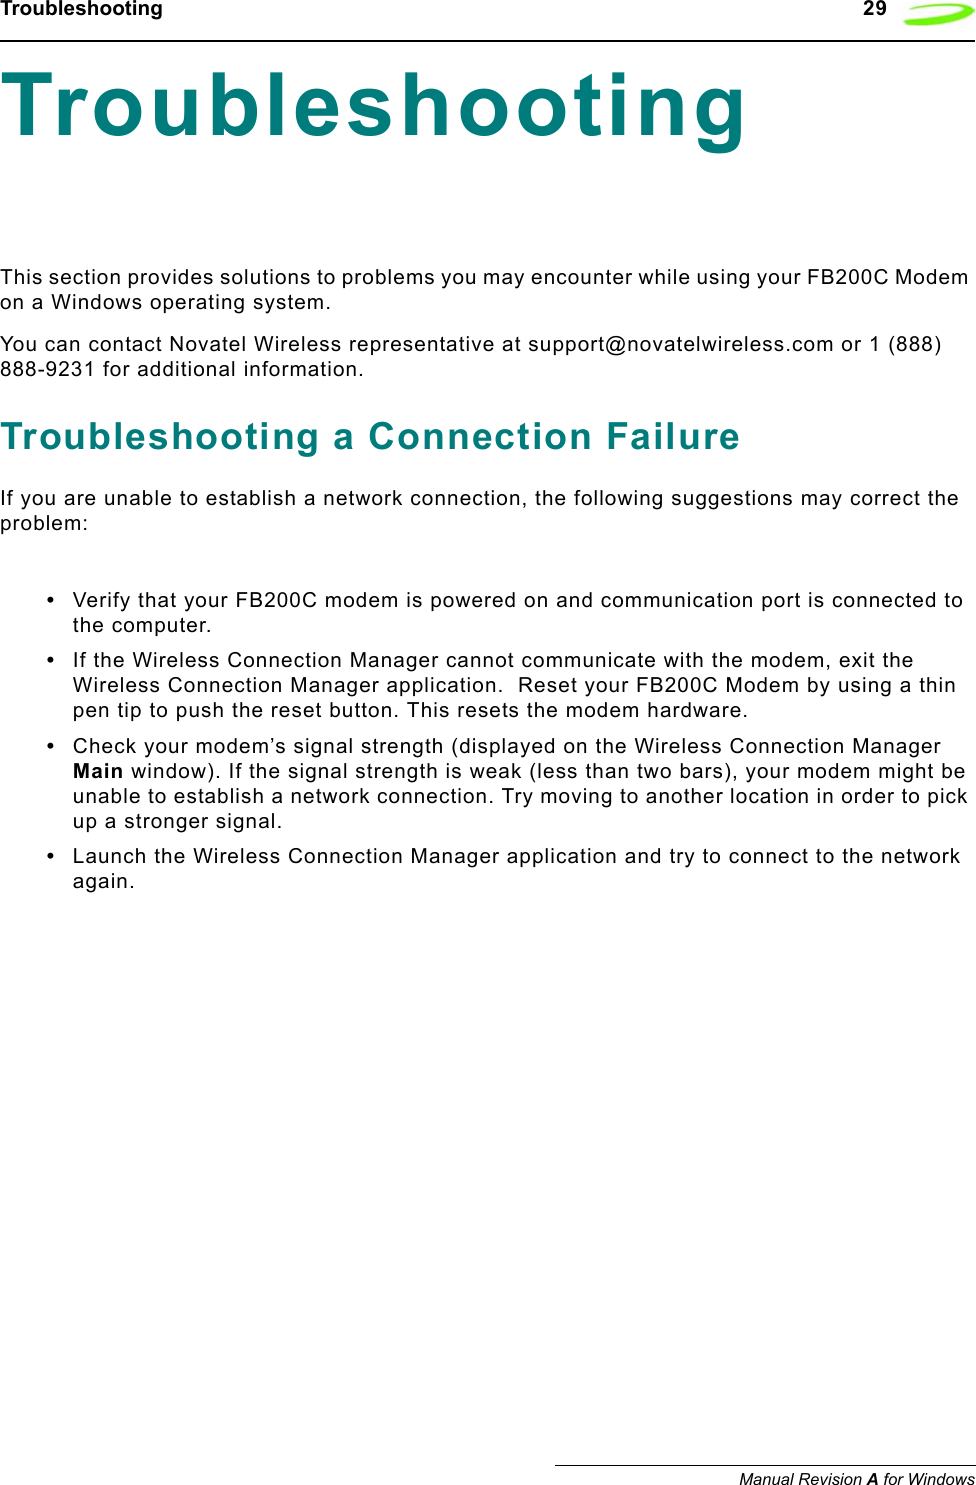 Troubleshooting   29Manual Revision A for WindowsTroubleshooting This section provides solutions to problems you may encounter while using your FB200C Modem on a Windows operating system. You can contact Novatel Wireless representative at support@novatelwireless.com or 1 (888) 888-9231 for additional information.Troubleshooting a Connection FailureIf you are unable to establish a network connection, the following suggestions may correct the problem:•Verify that your FB200C modem is powered on and communication port is connected to the computer.•If the Wireless Connection Manager cannot communicate with the modem, exit the Wireless Connection Manager application.  Reset your FB200C Modem by using a thin pen tip to push the reset button. This resets the modem hardware.•Check your modem’s signal strength (displayed on the Wireless Connection Manager Main window). If the signal strength is weak (less than two bars), your modem might be unable to establish a network connection. Try moving to another location in order to pick up a stronger signal.•Launch the Wireless Connection Manager application and try to connect to the network again.